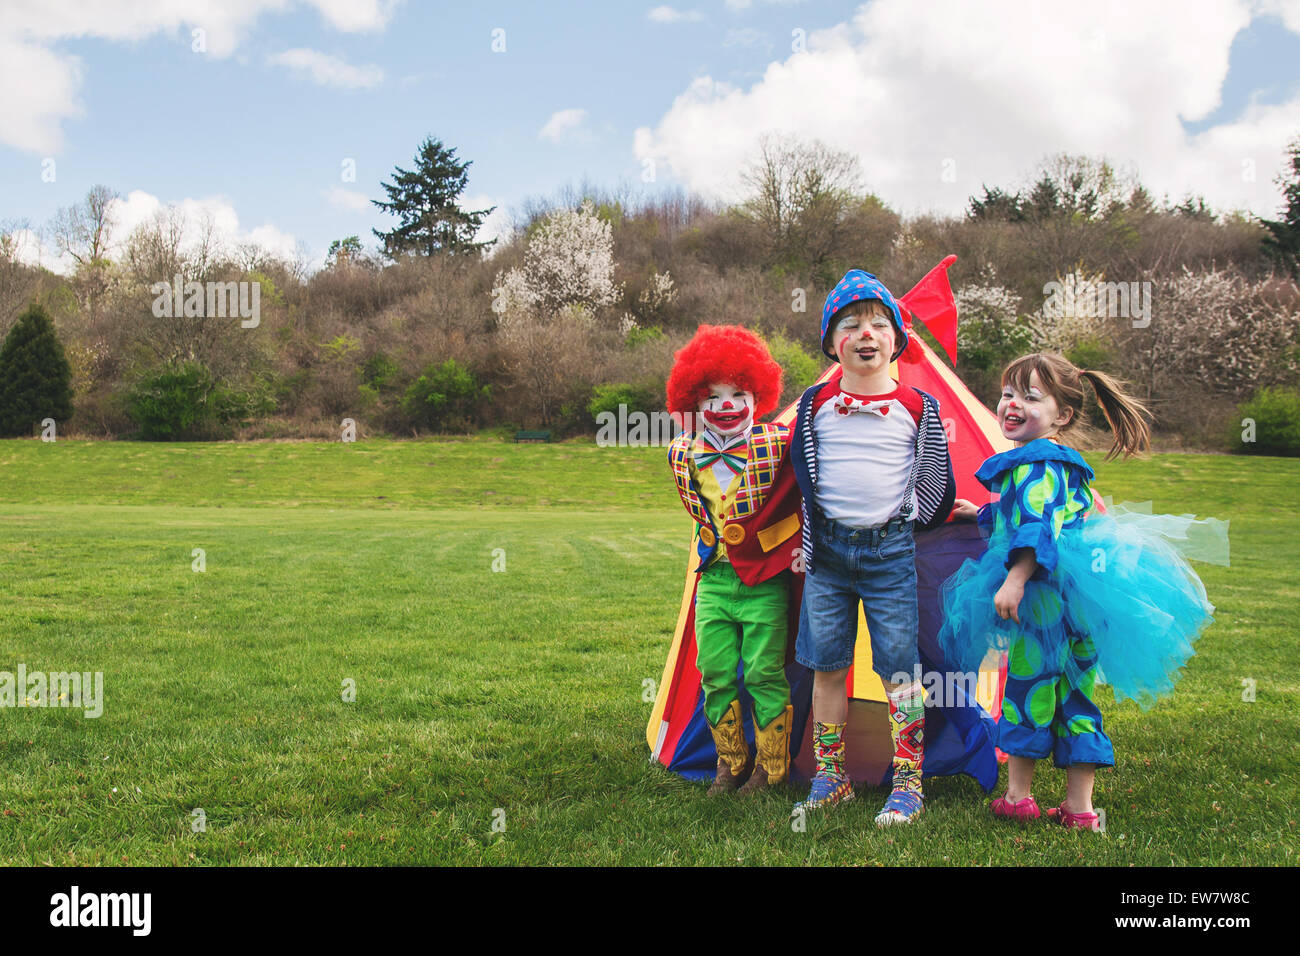 Three smiling children dressed as clowns Stock Photo